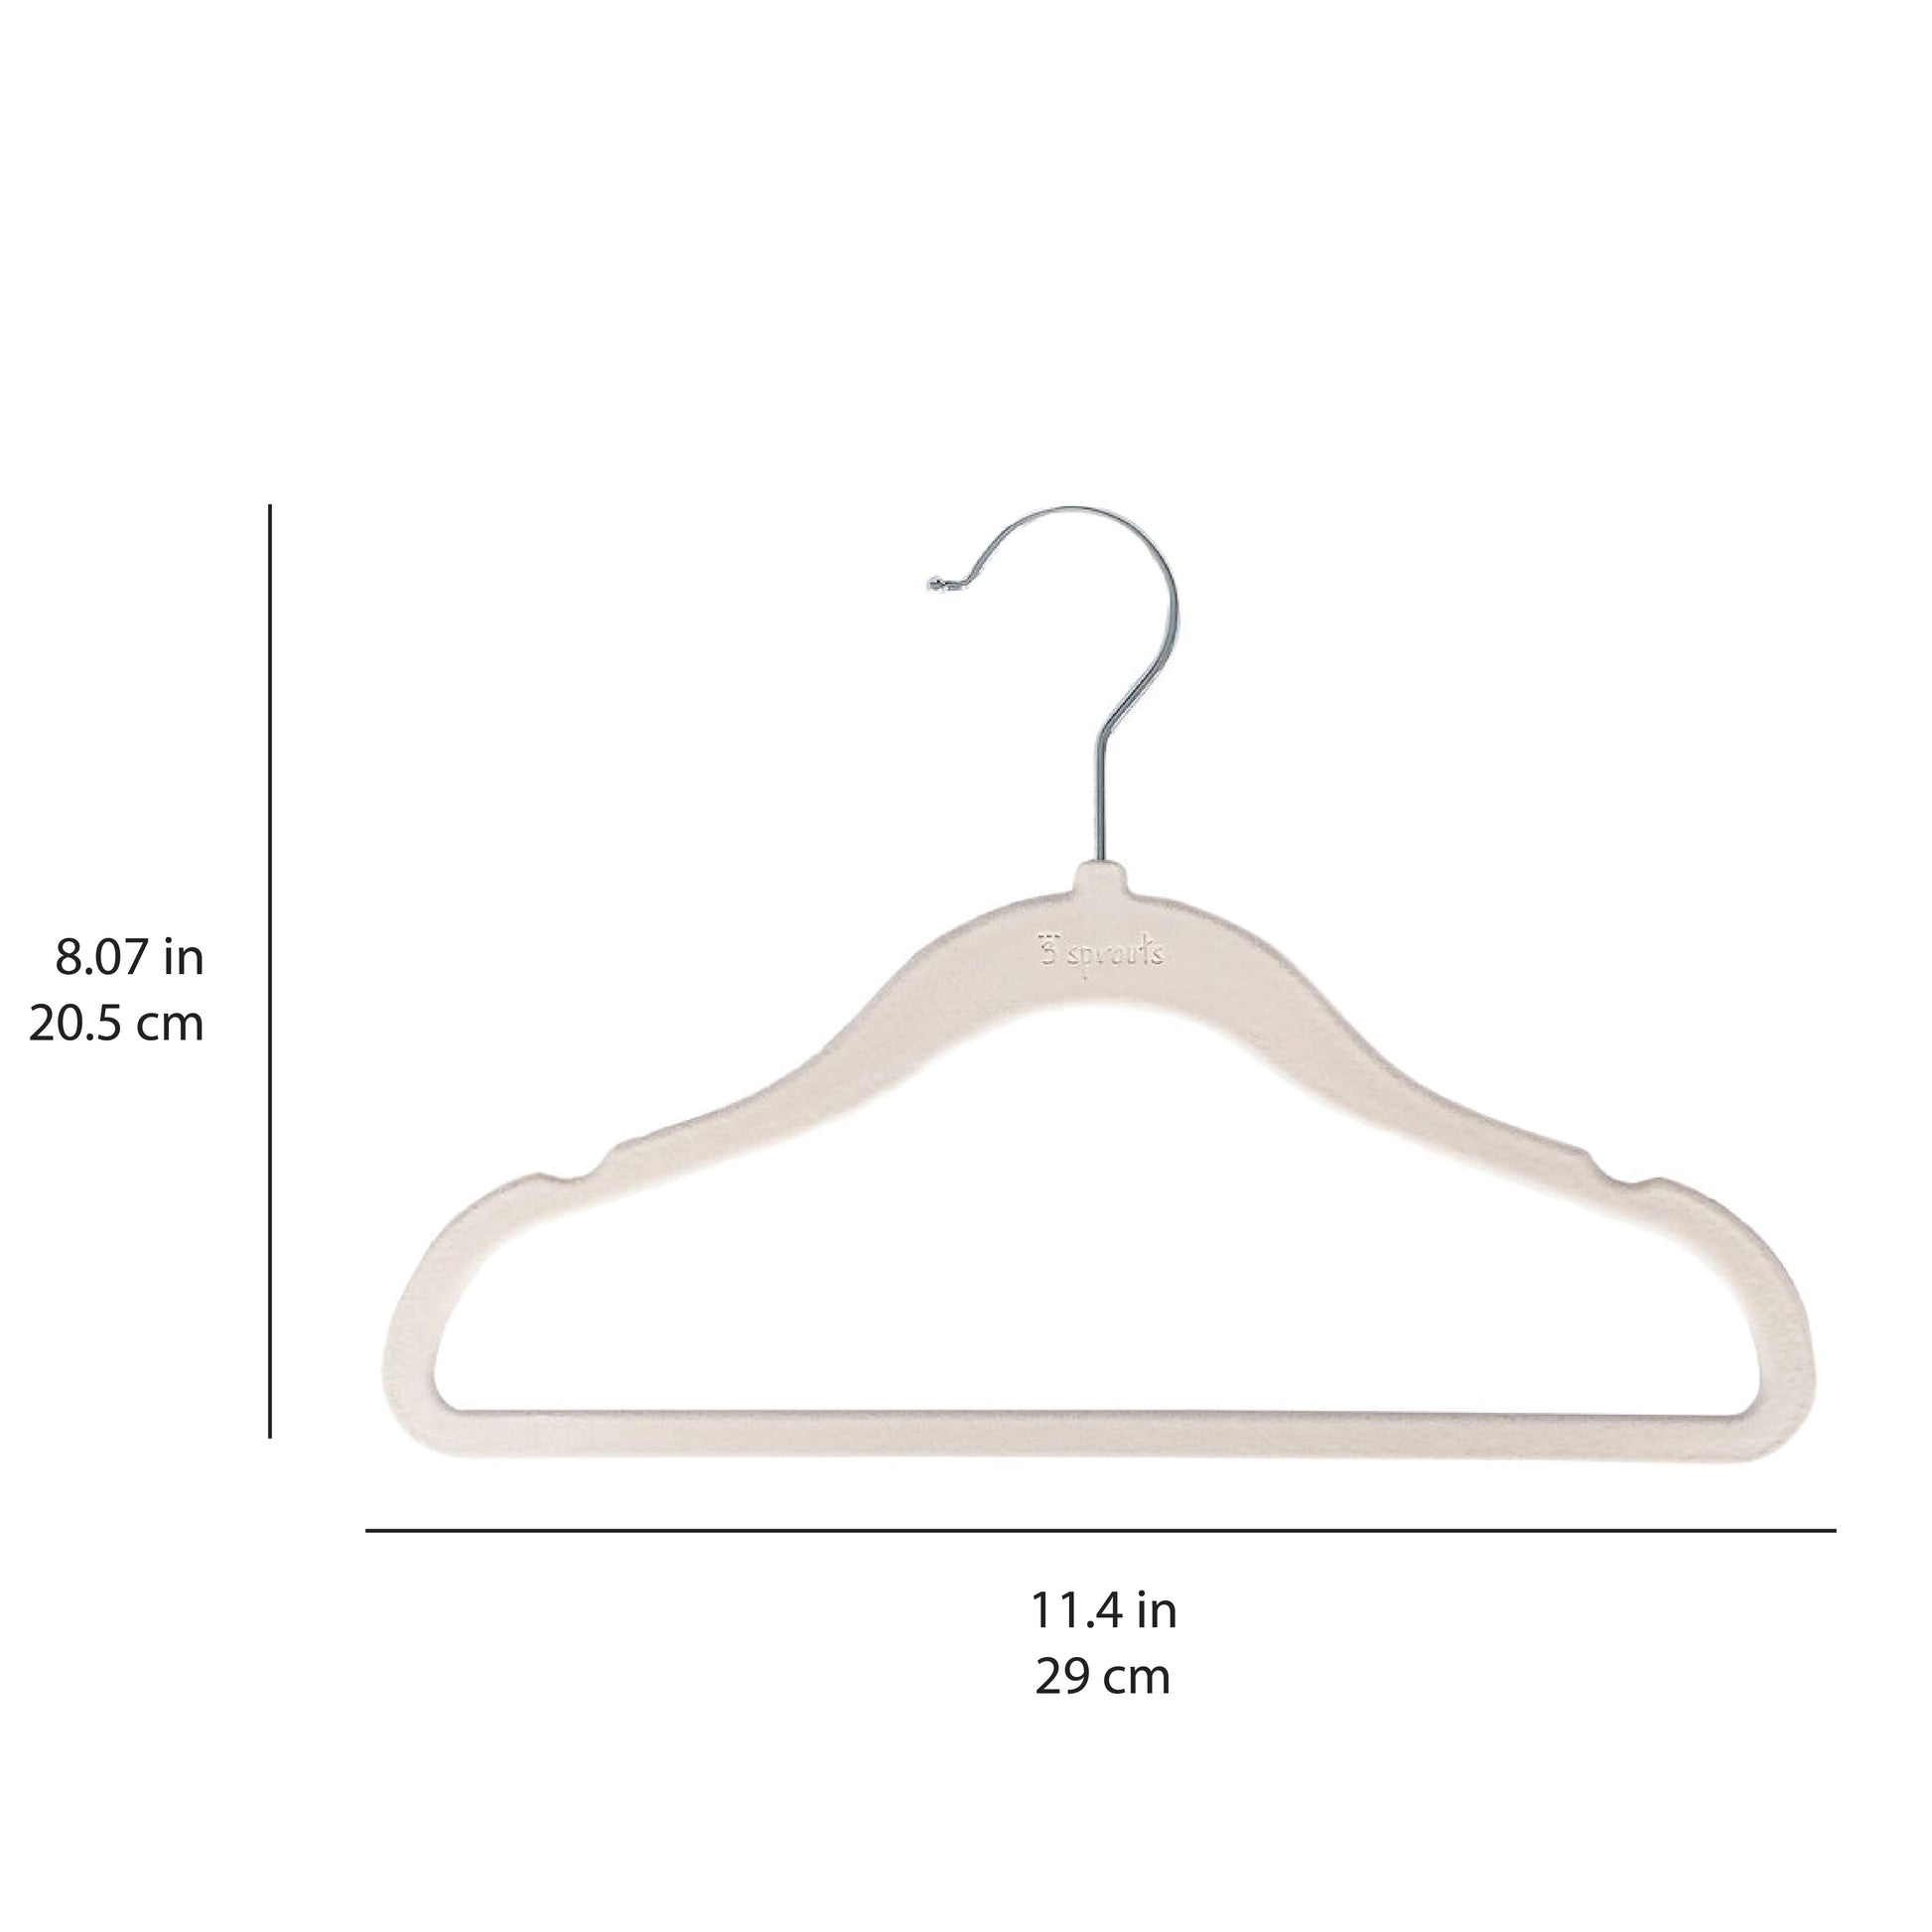 H&M Home - 3-Pack Clothes Hangers - White